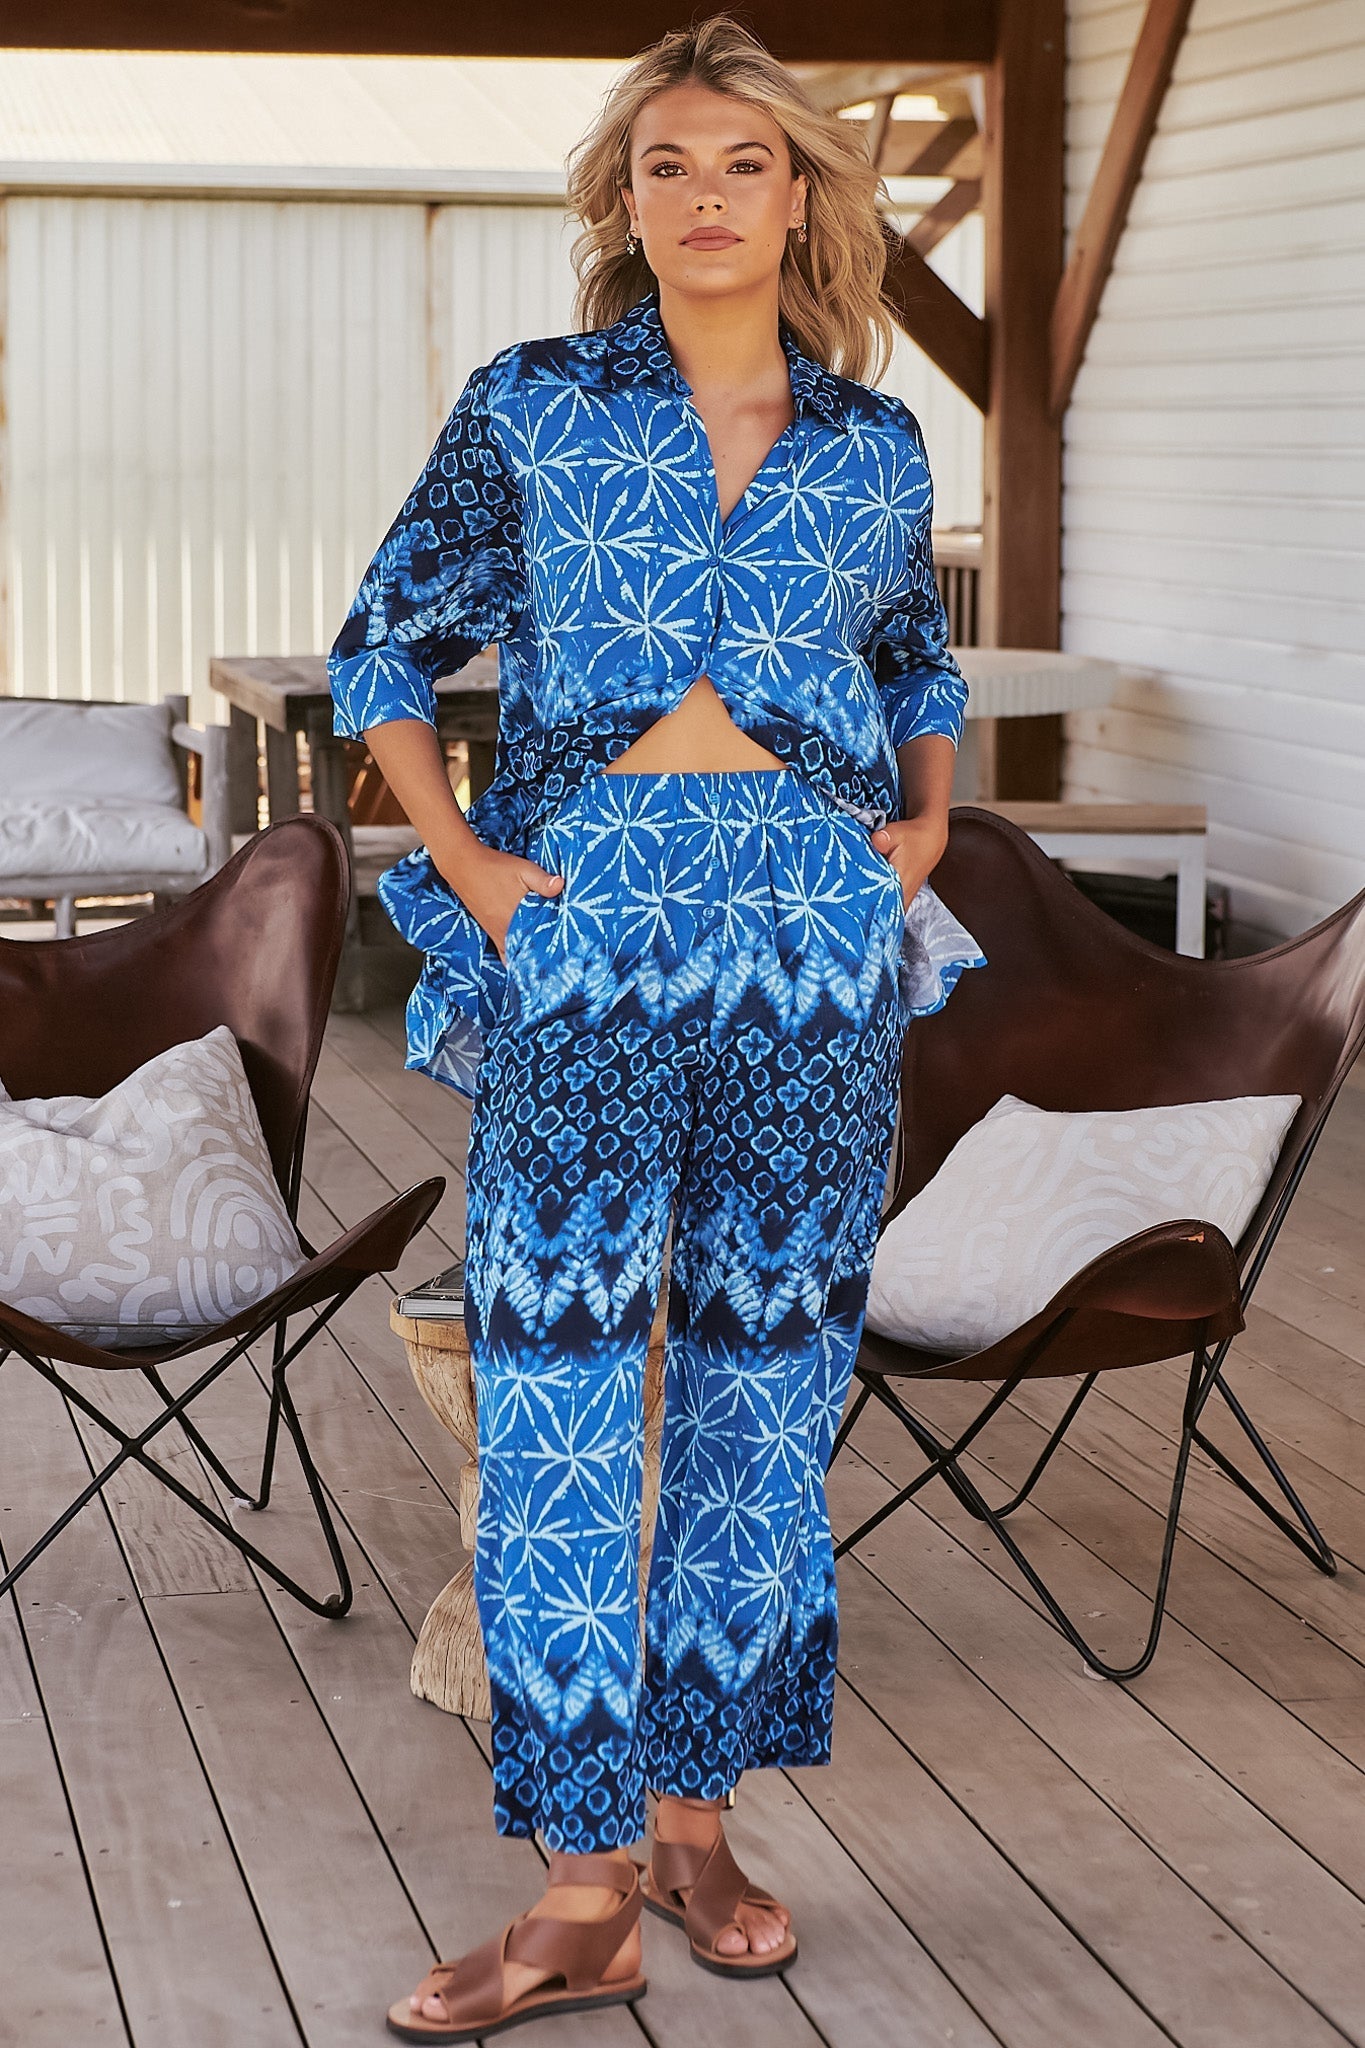 JAASE - Sunni Pants: Elasticated Waist Relaxed Pants in Tranquil Tides Print